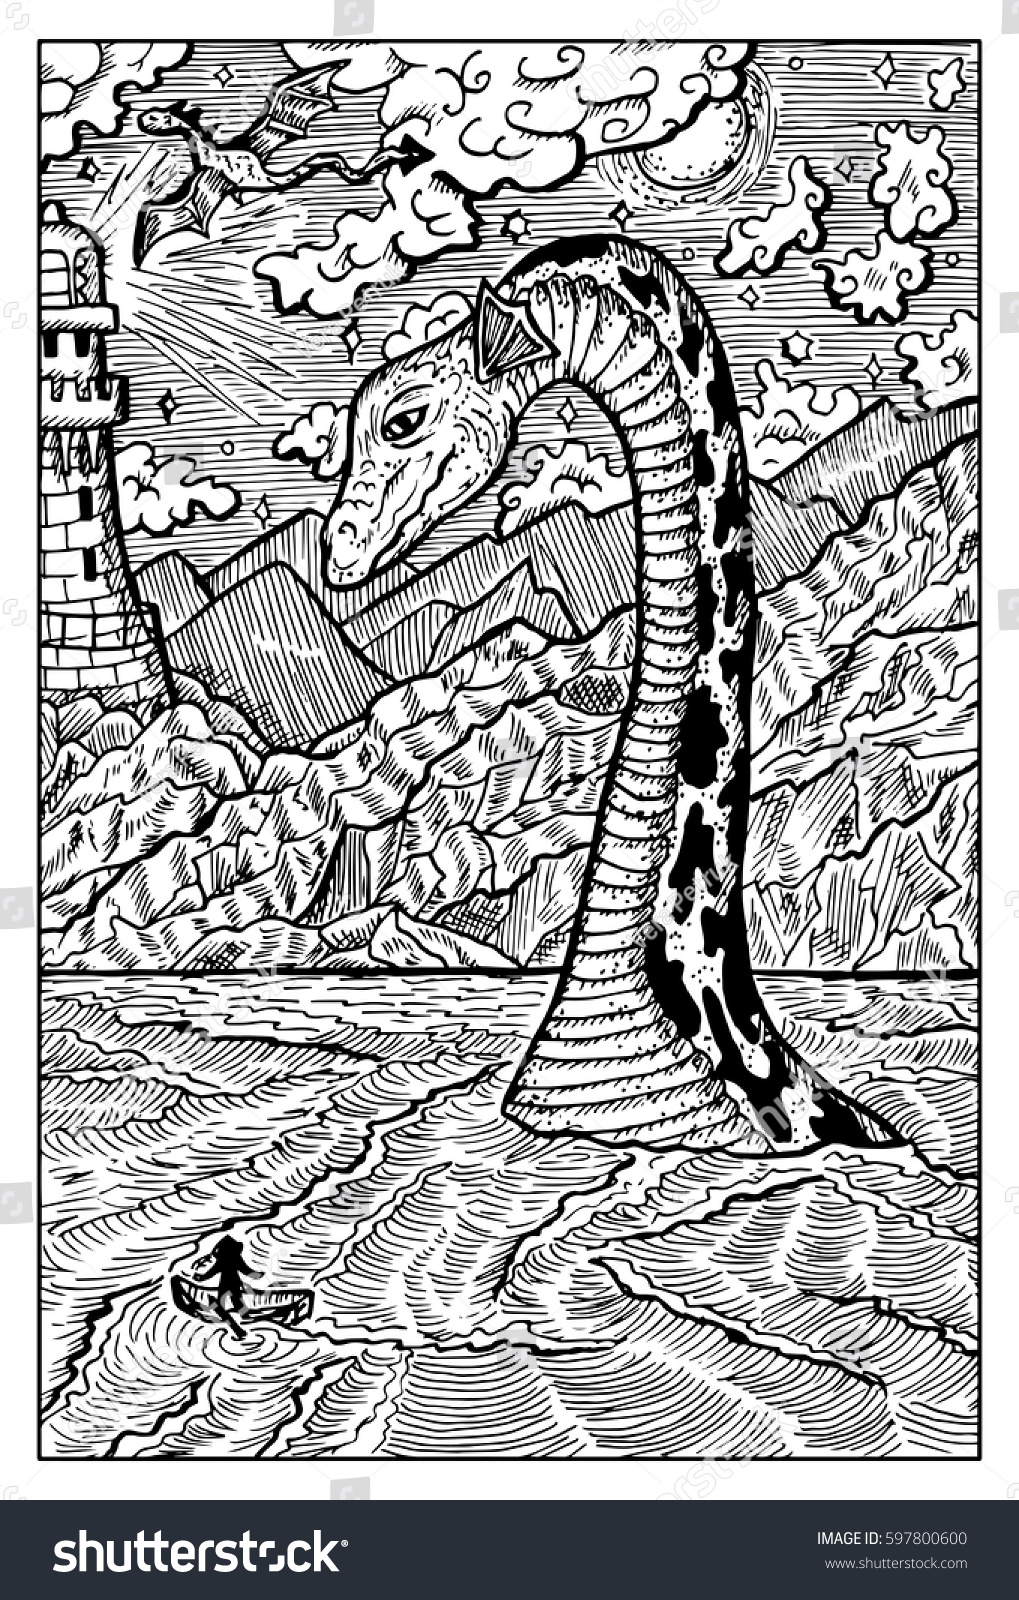 Loch Ness Lake Monster Nessie Hand drawn vector illustration Engraved line art drawing